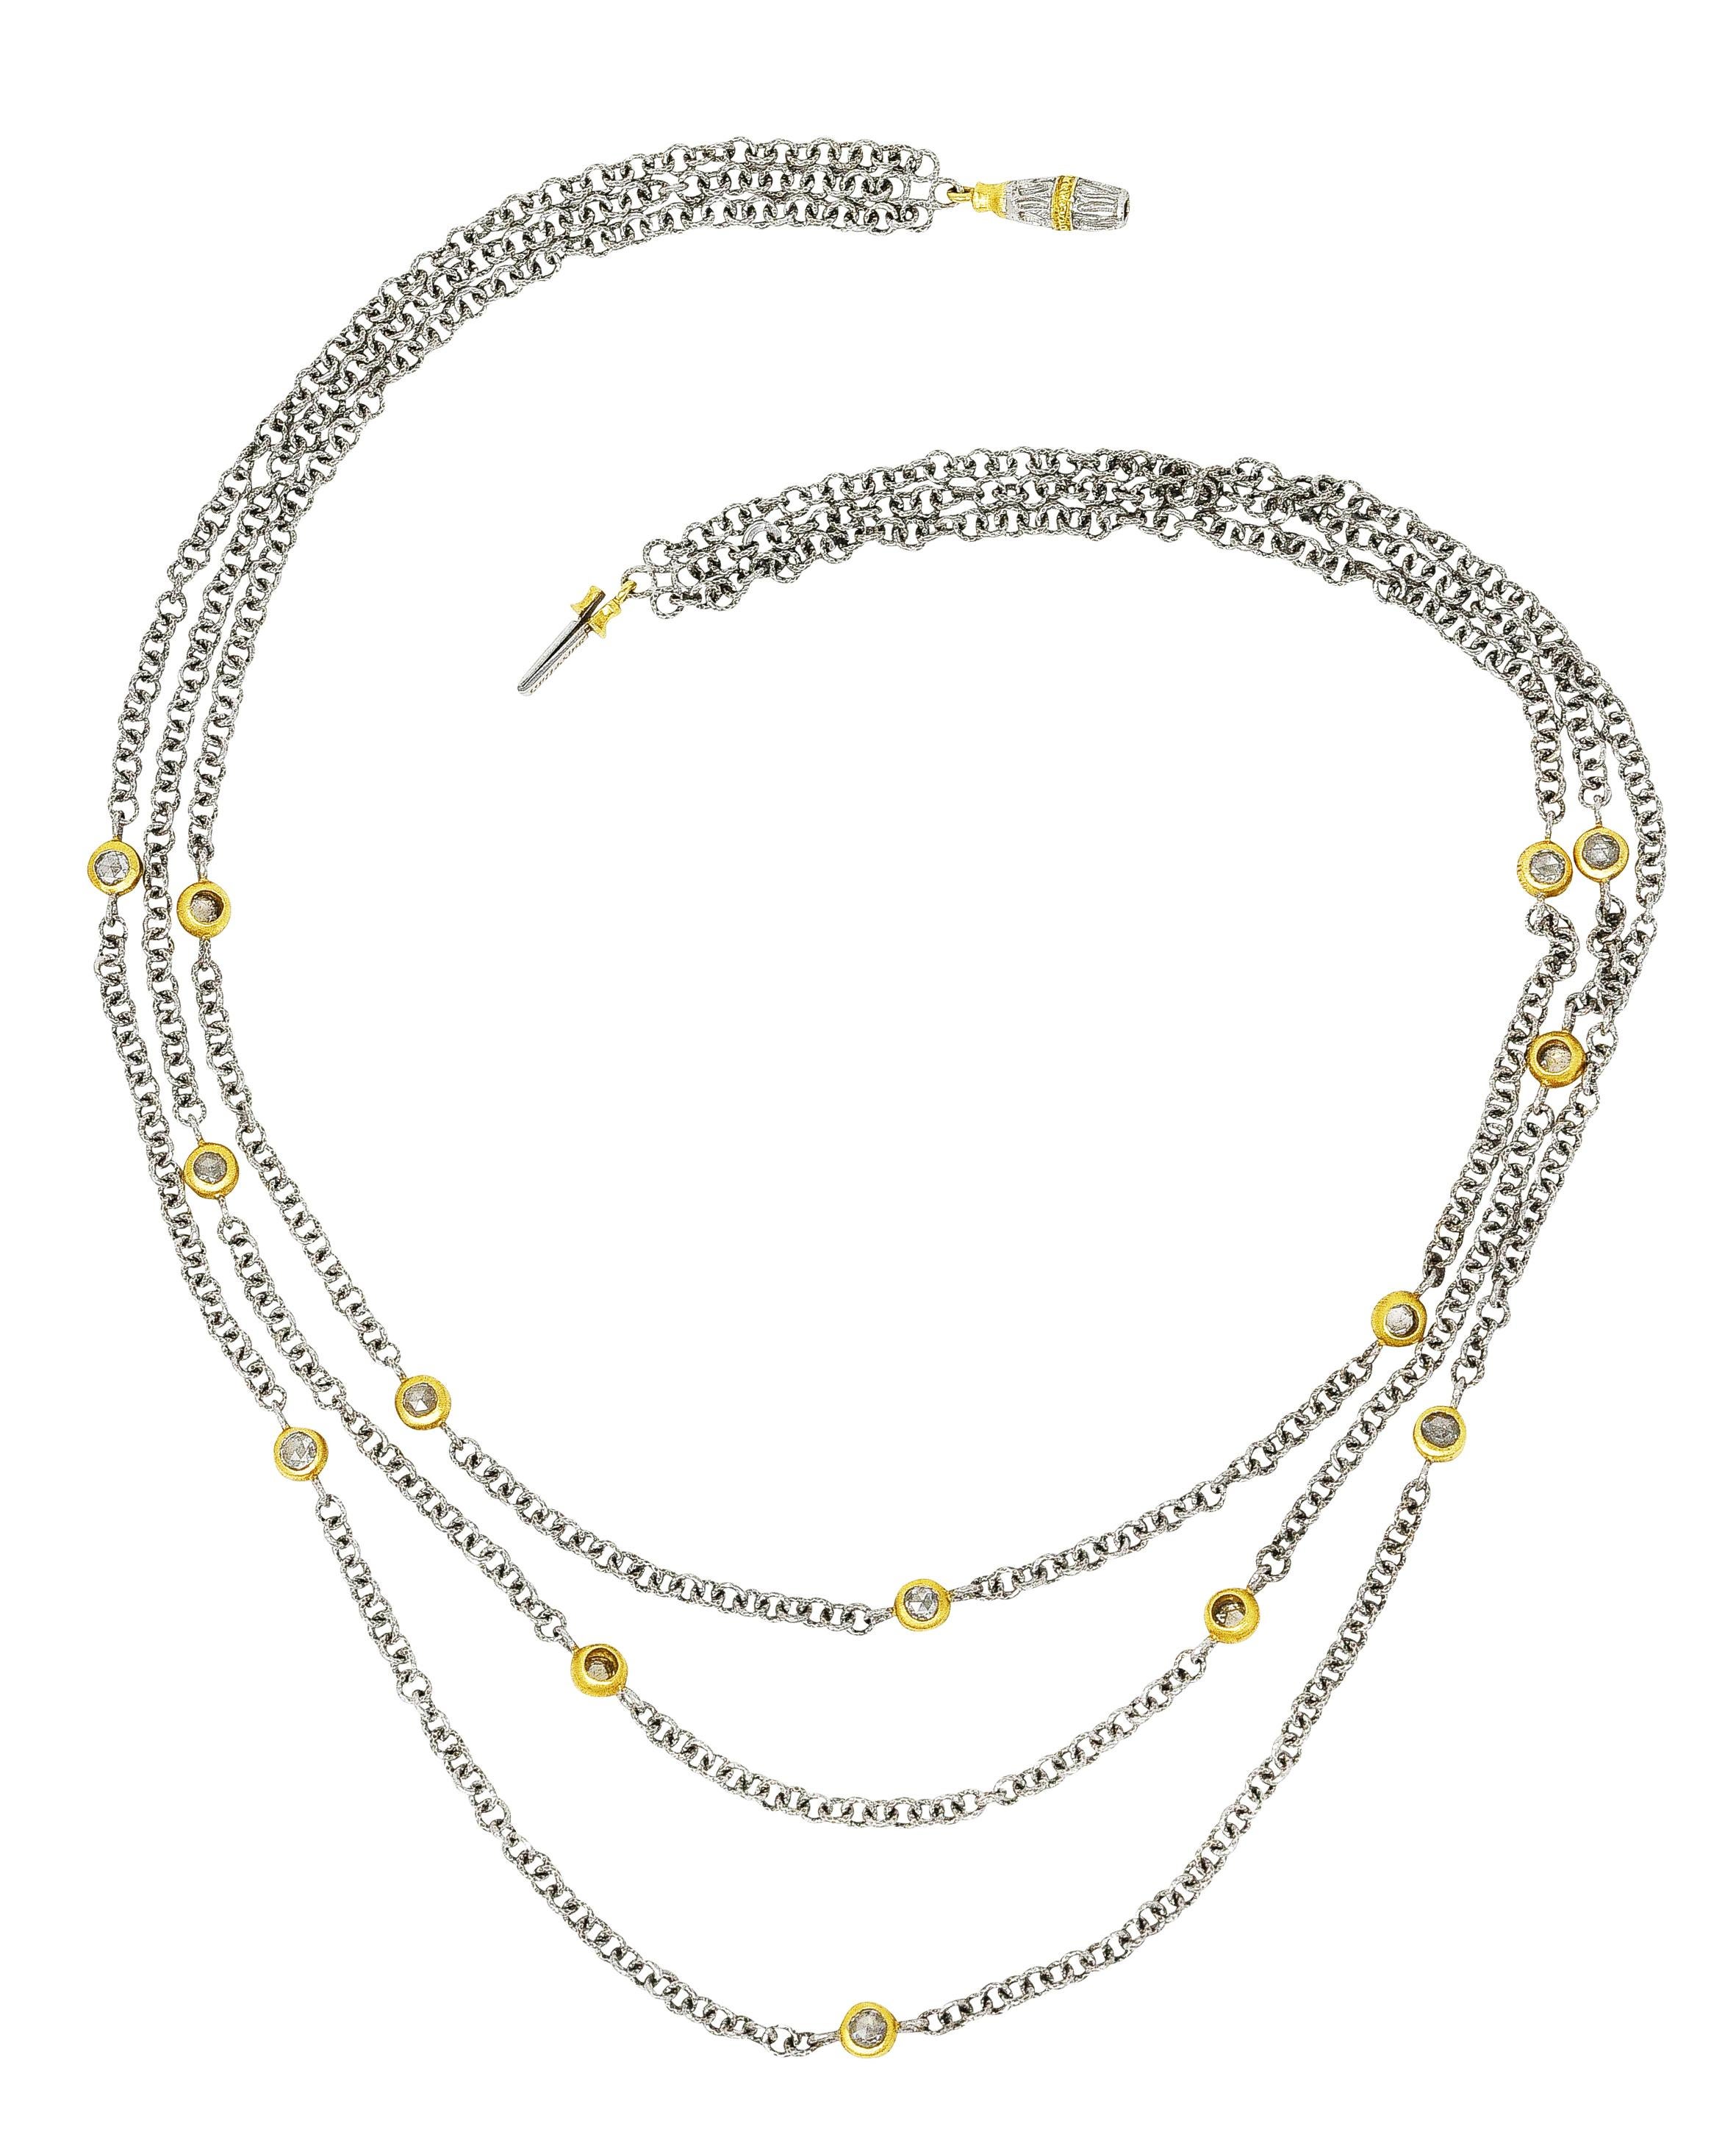 Multi-strand necklace is comprised of three swagged white gold chains featuring texturous round links. Intermittent with yellow gold stations bezel set with rose cut diamonds. Weighing in total approximately 0.50 carat - quality is consistent with